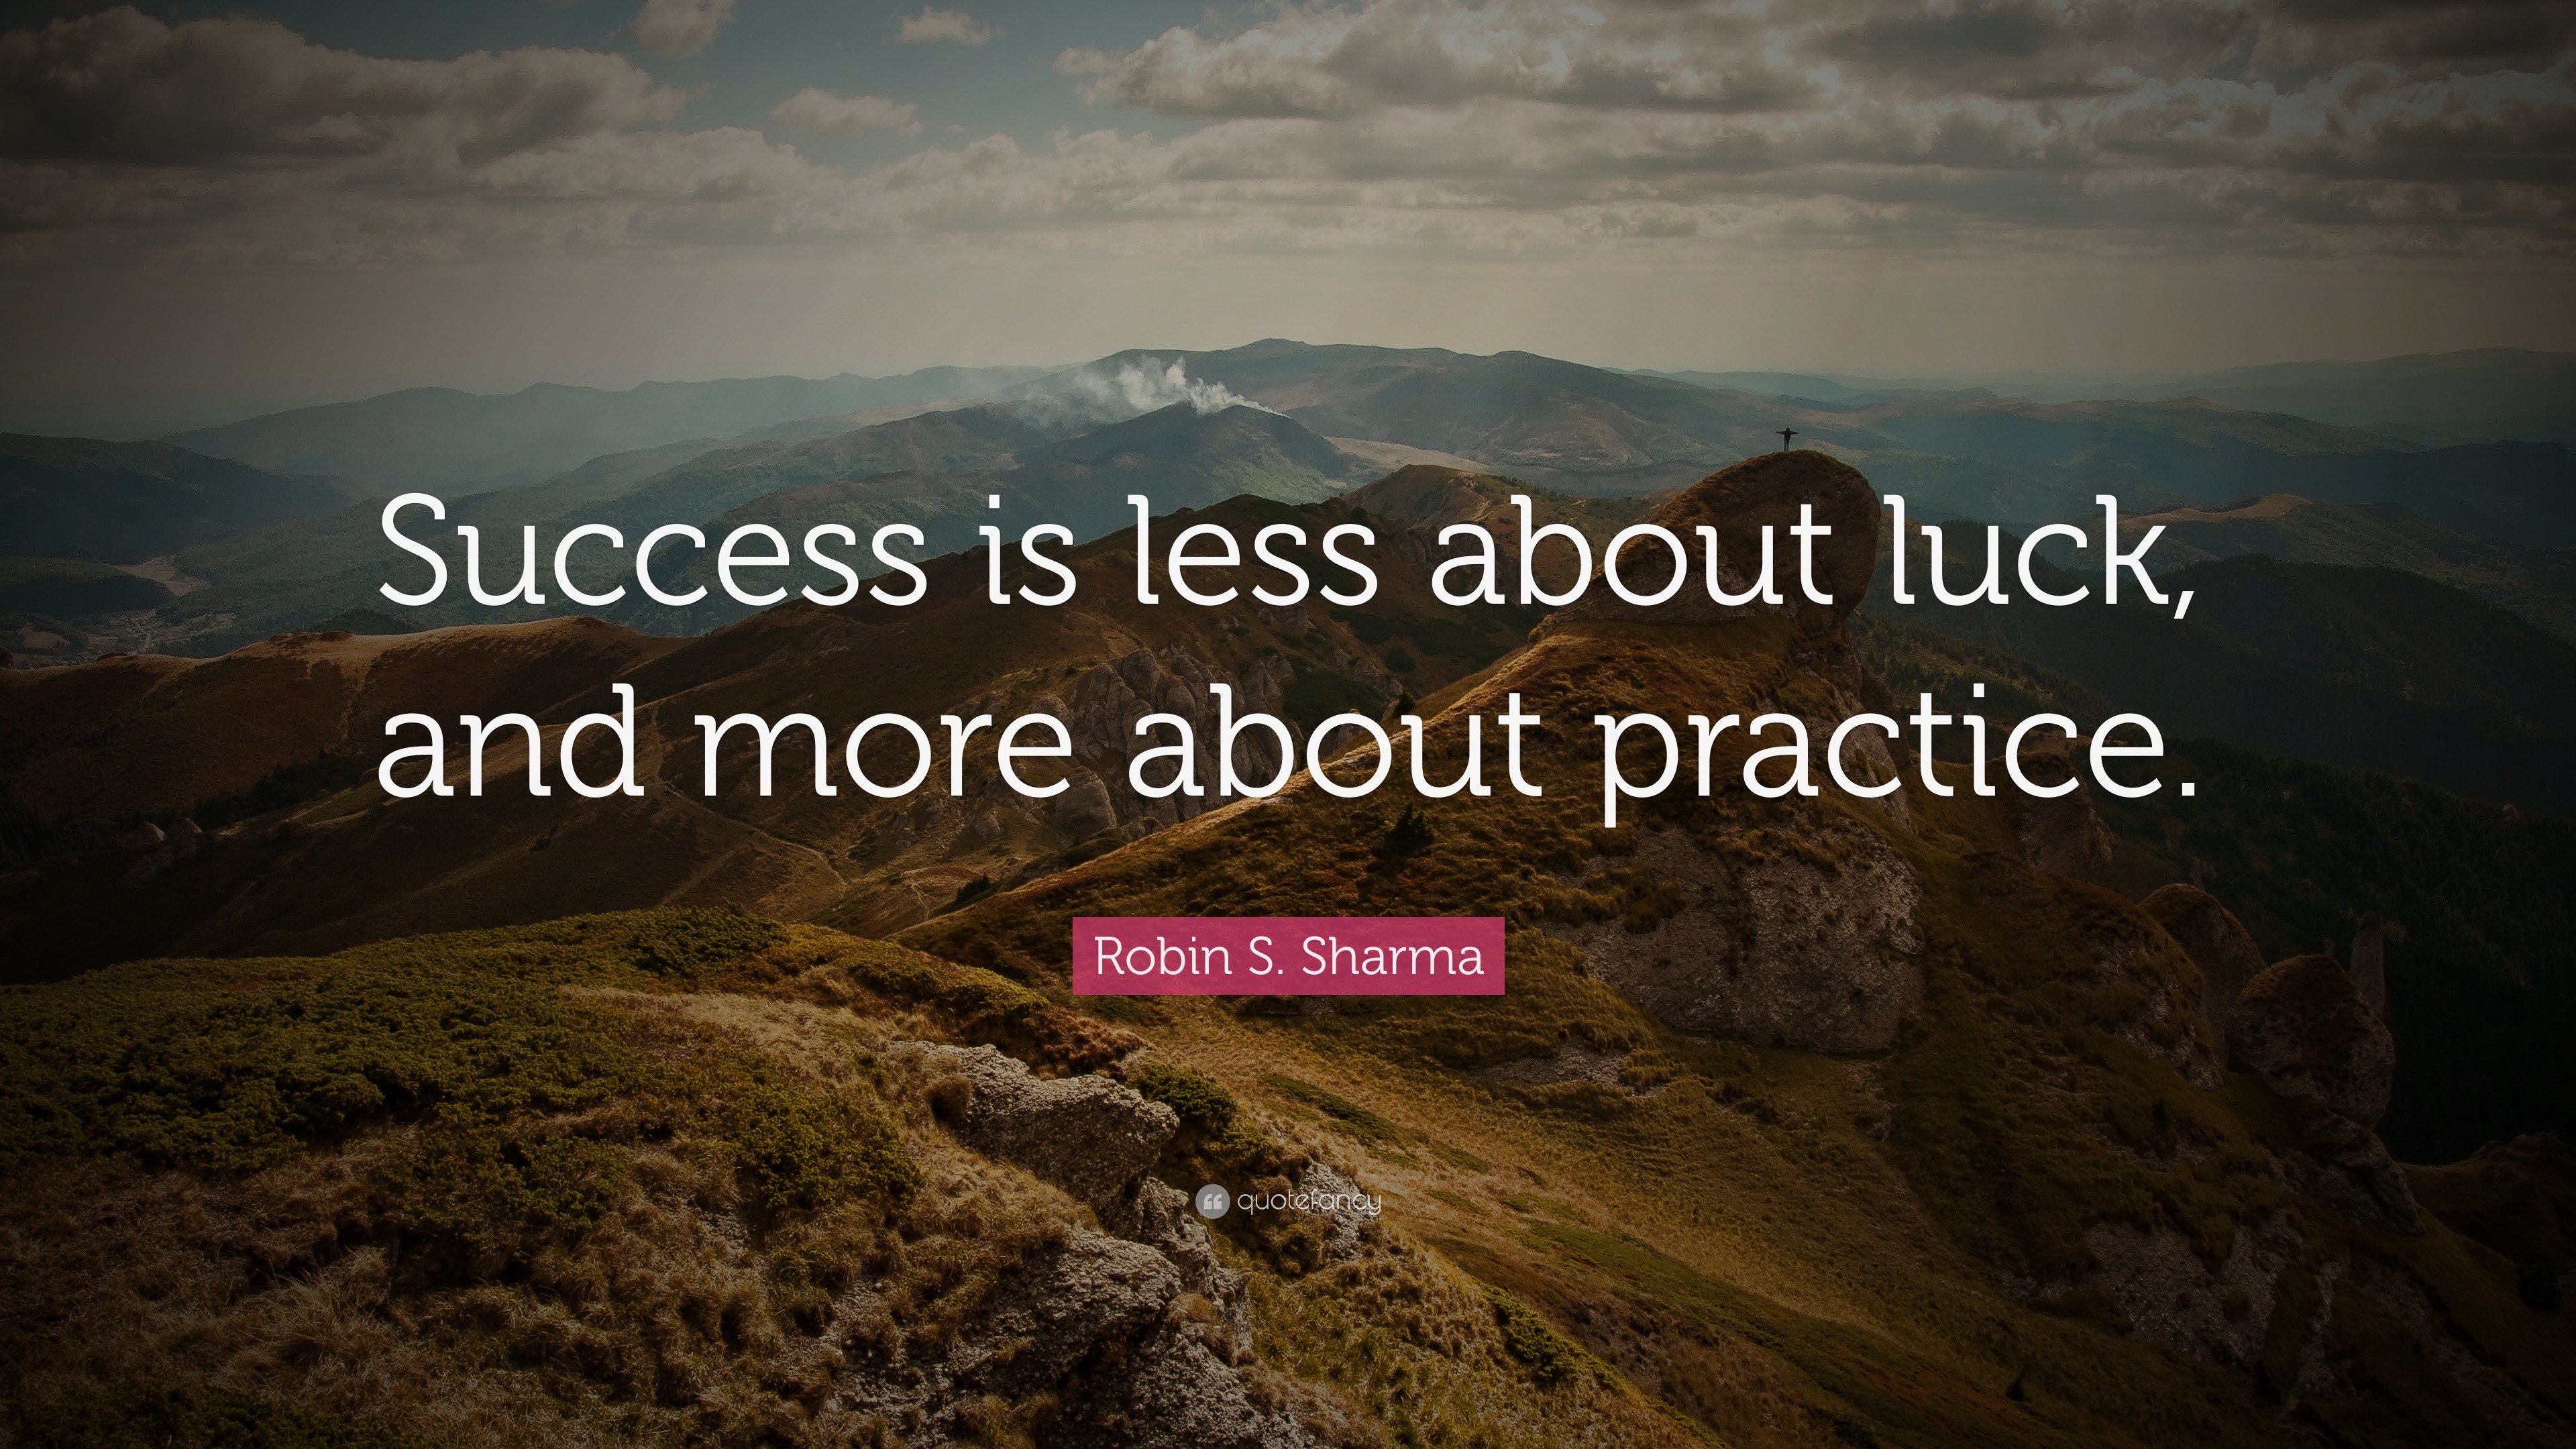 Robin S. Sharma Quote: “Success is less about luck, and more about